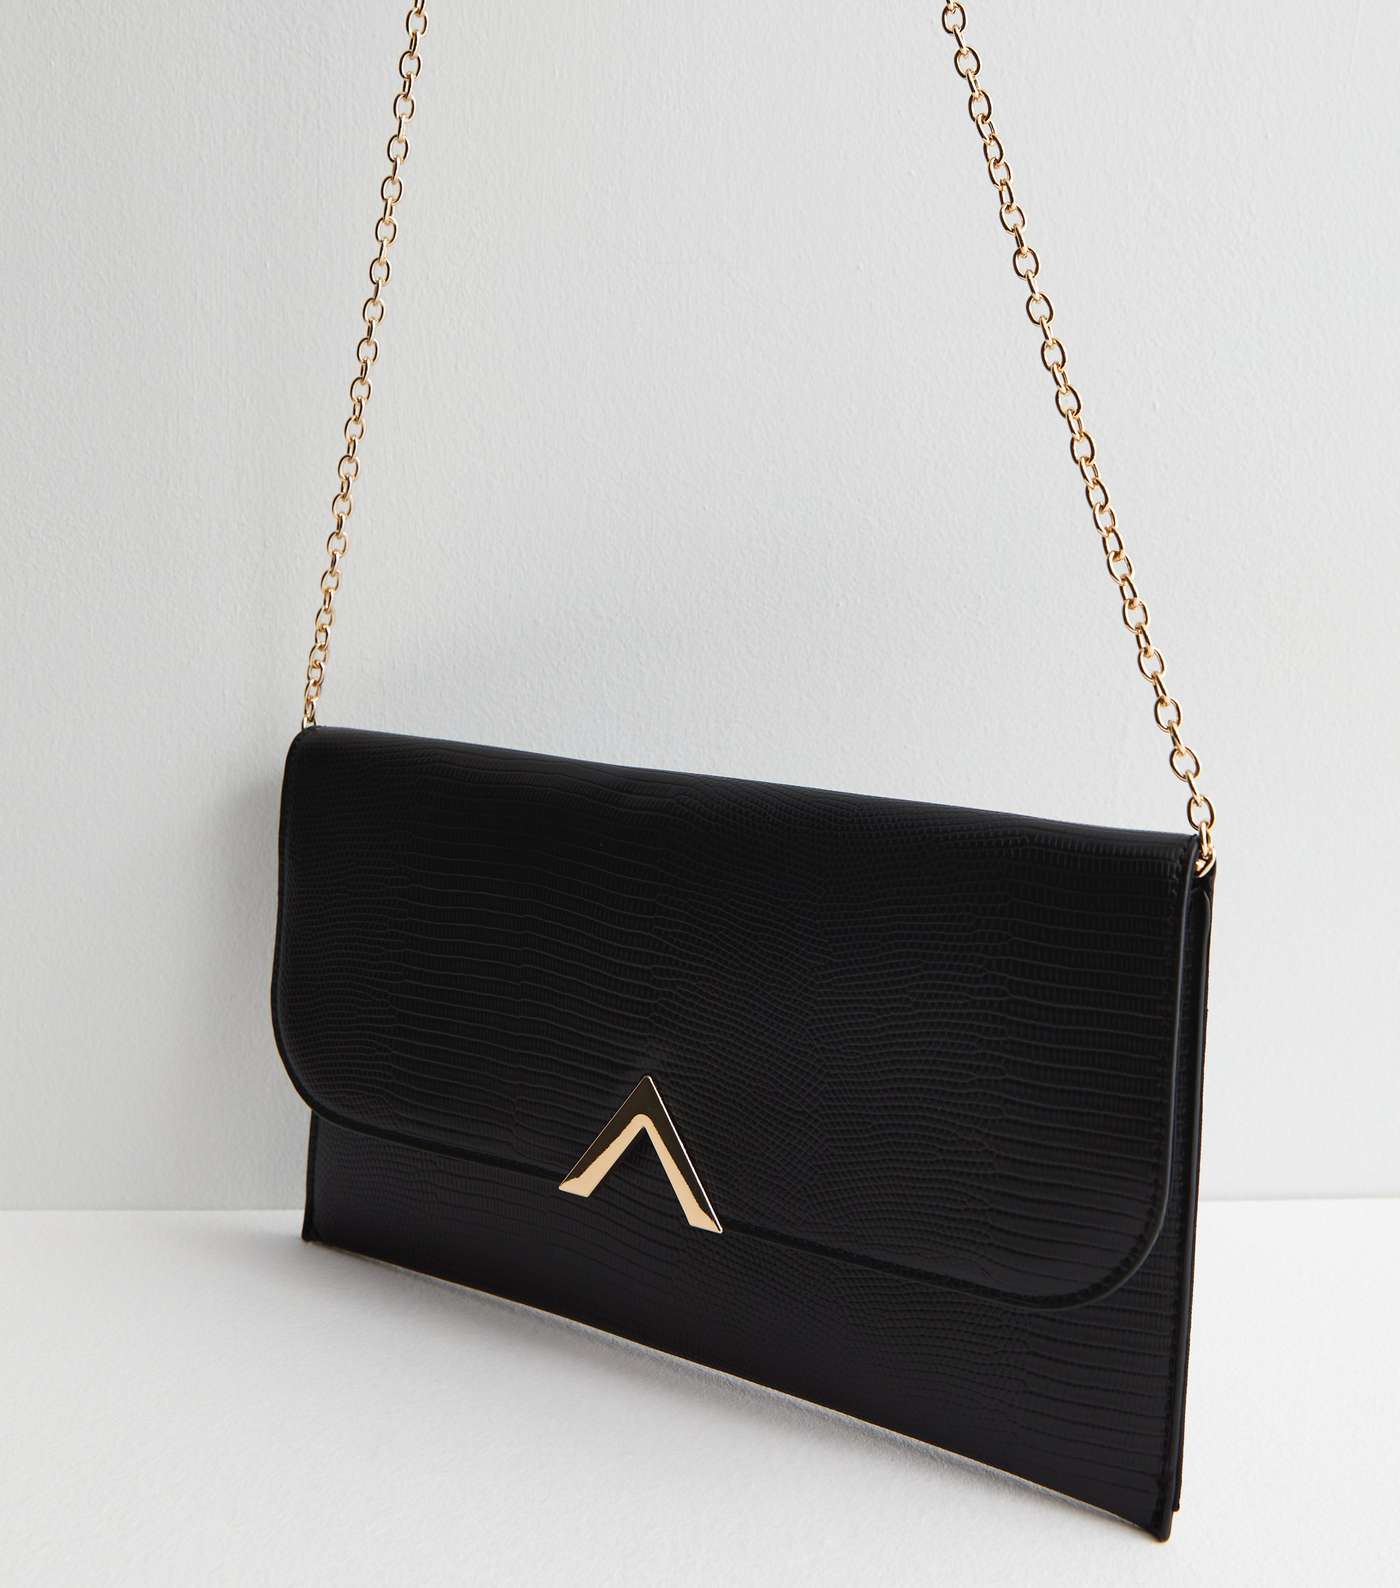 Black Leather-Look Chain Strap Clutch Bag Image 3